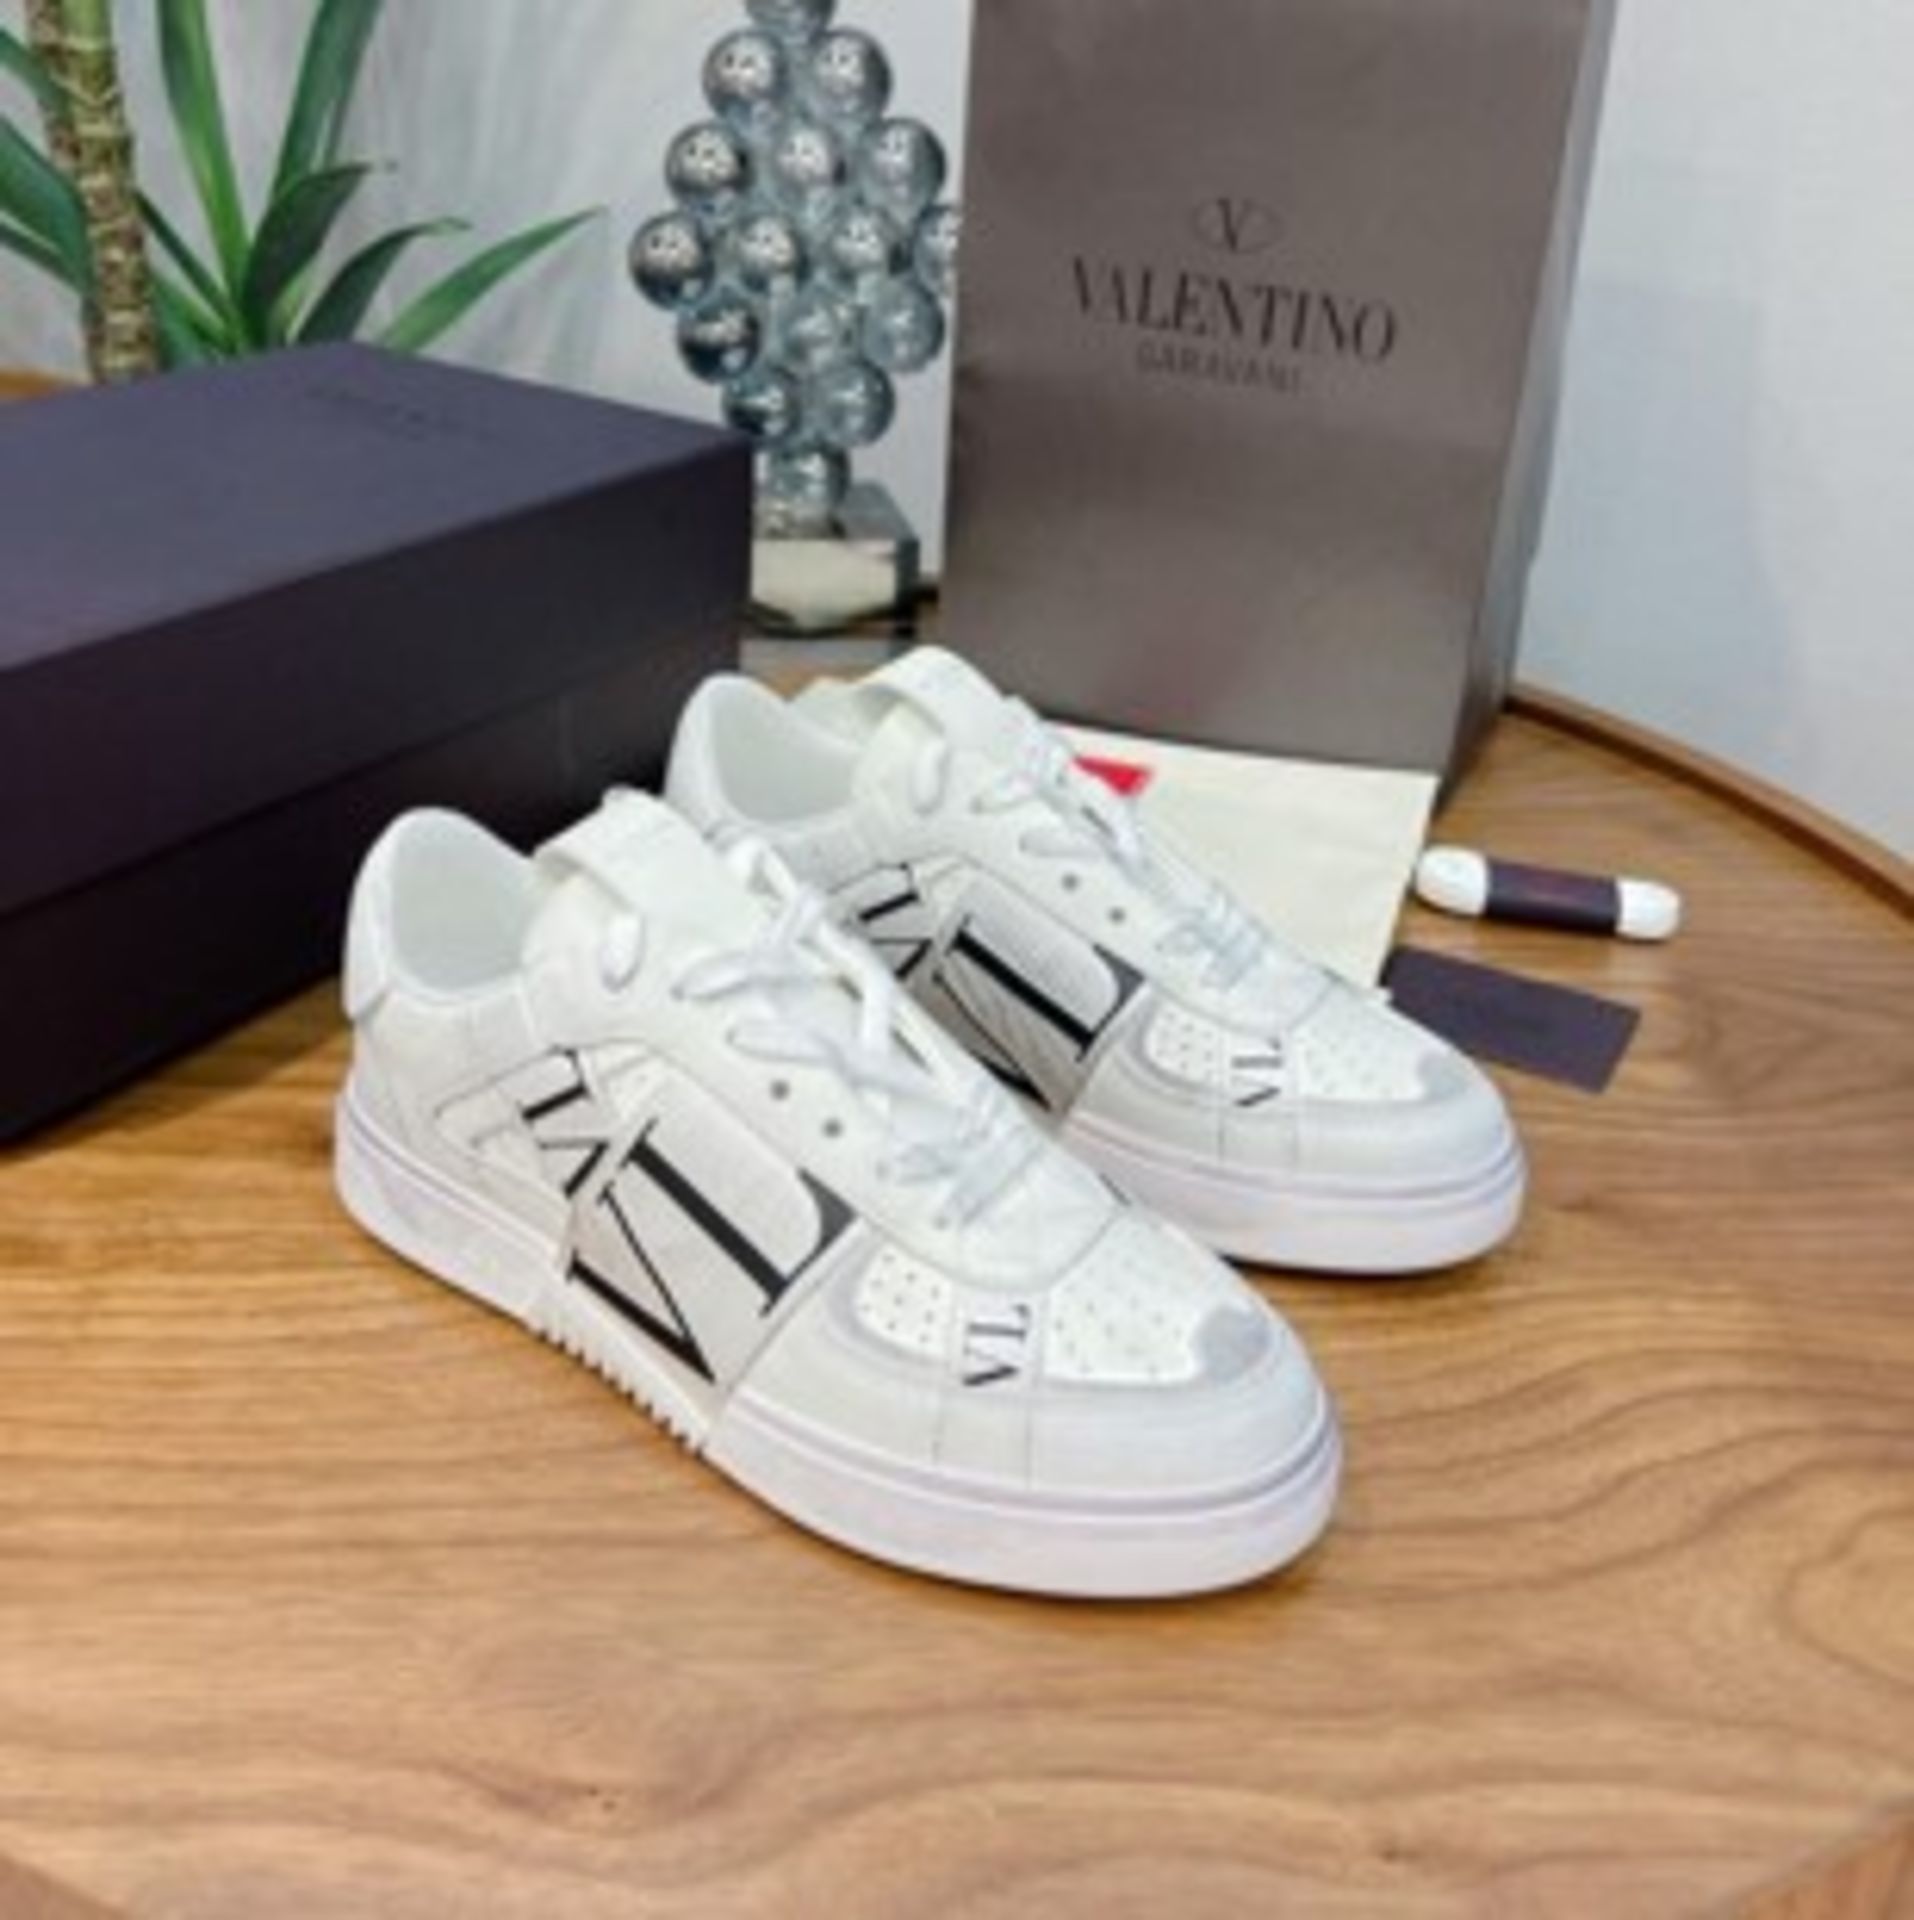 Brand New Valentino Trainers size 38. RRP £569